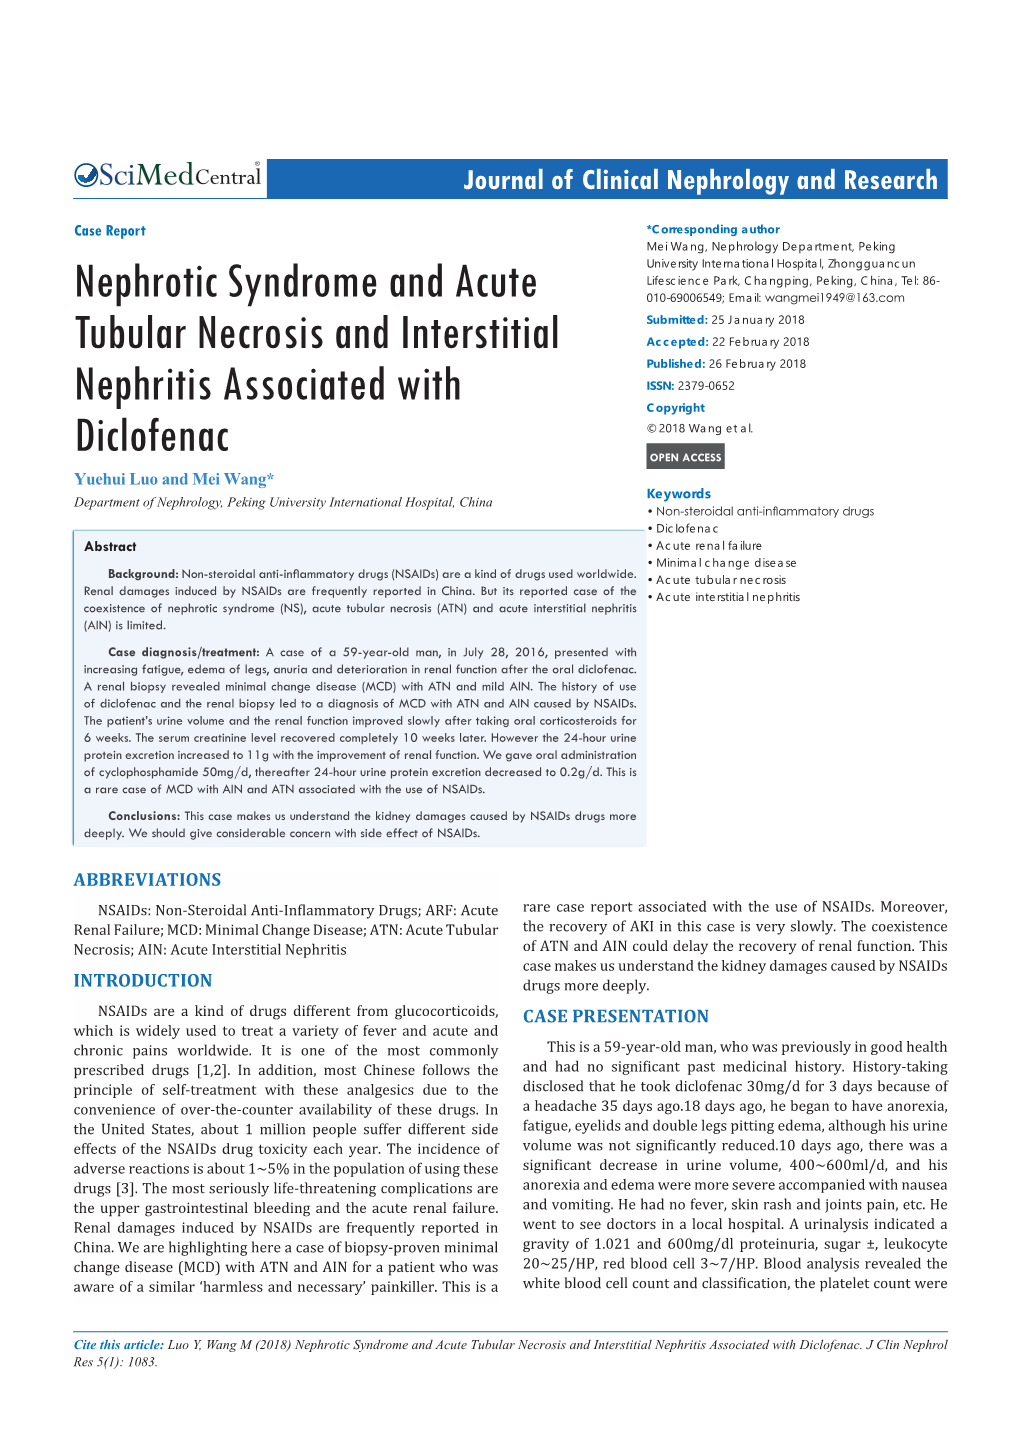 Nephrotic Syndrome and Acute Tubular Necrosis and Interstitial Nephritis Associated with Diclofenac